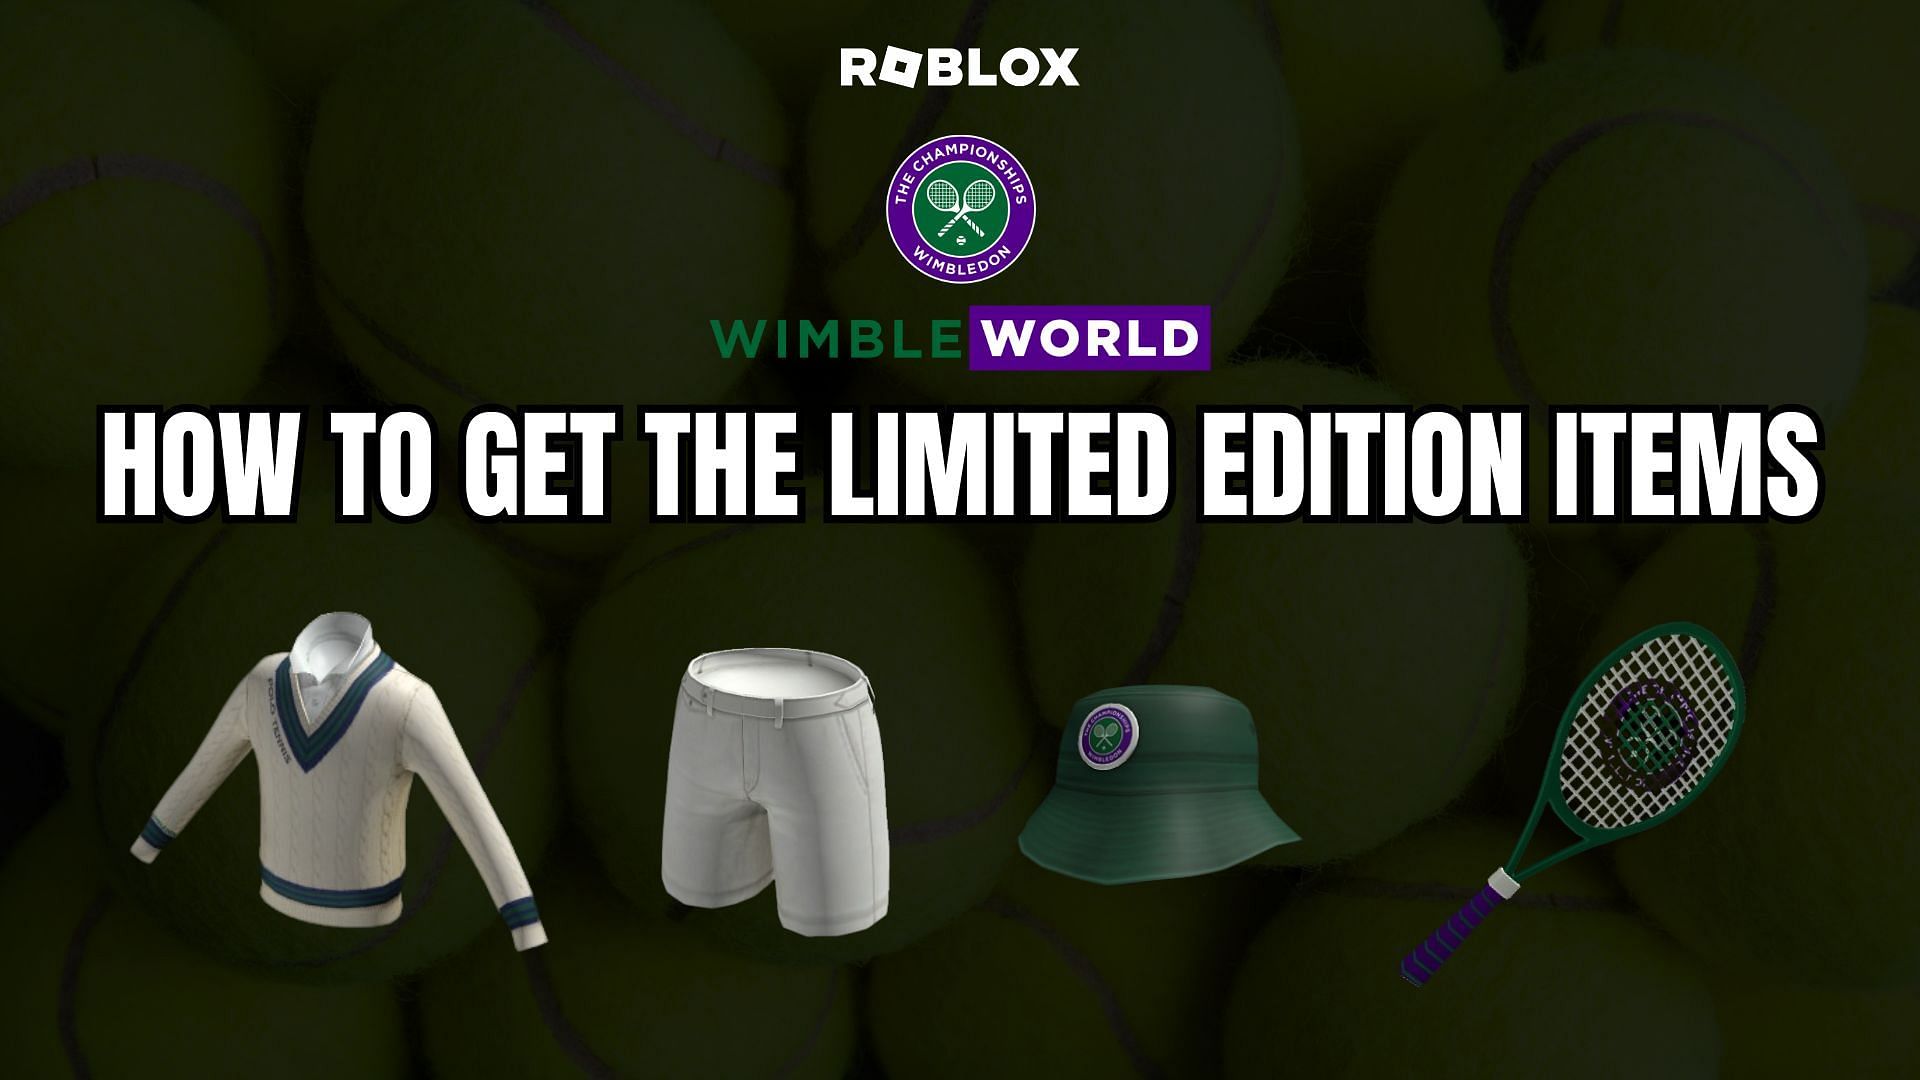 Bagging the limited edition items in Roblox WimbleWorld Tennis is made easy with this guide. (Image via Sportskeeda)